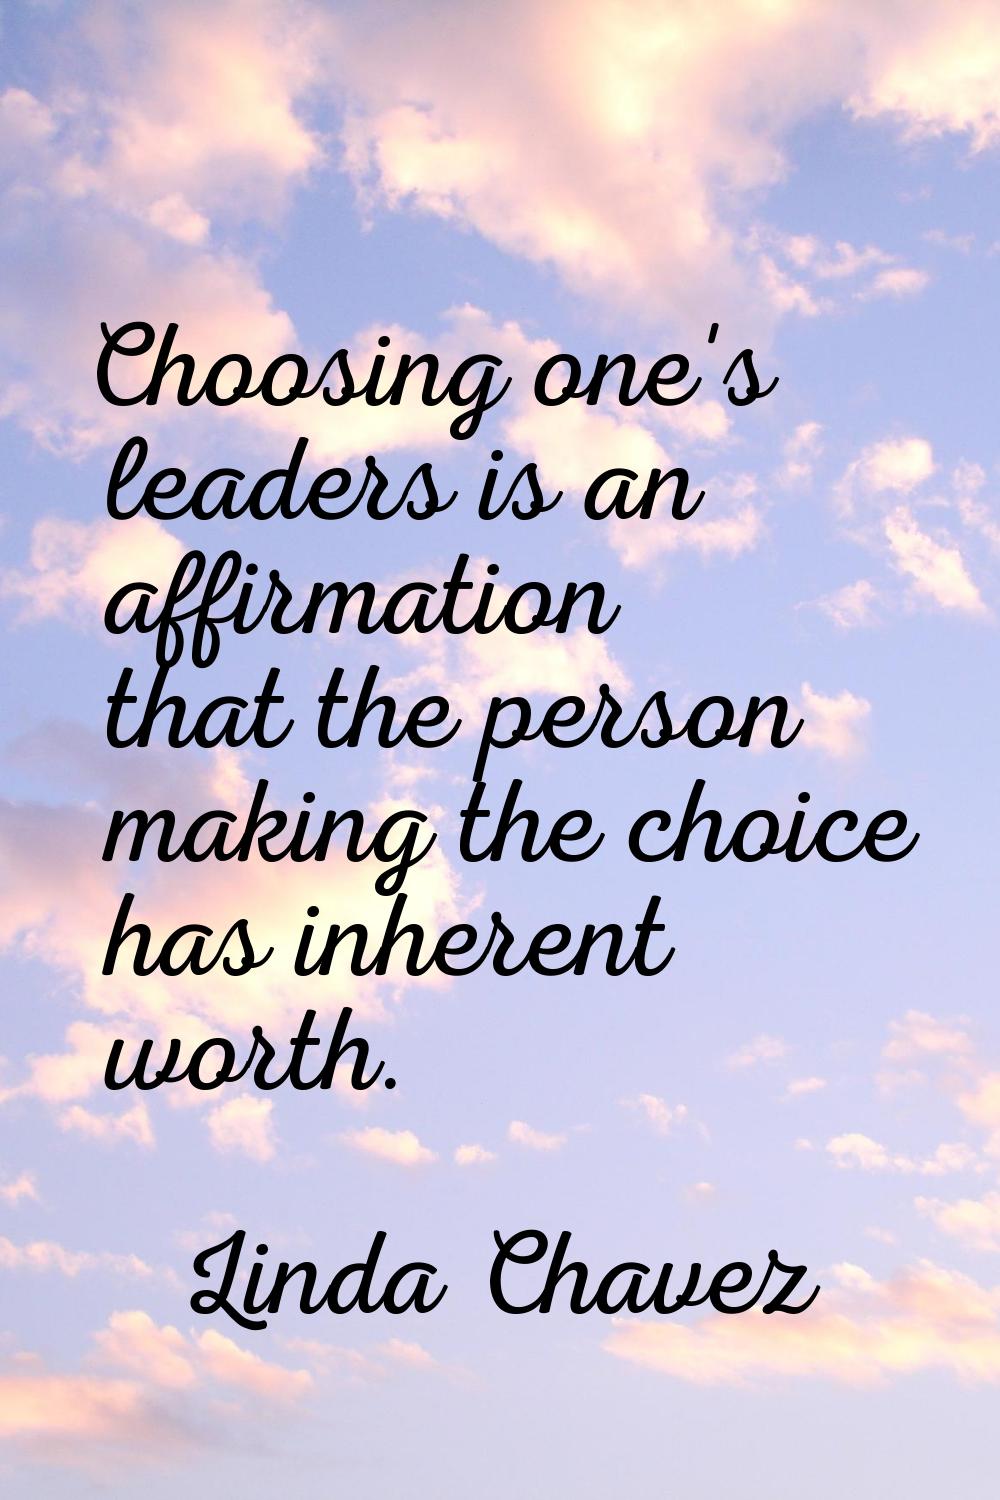 Choosing one's leaders is an affirmation that the person making the choice has inherent worth.